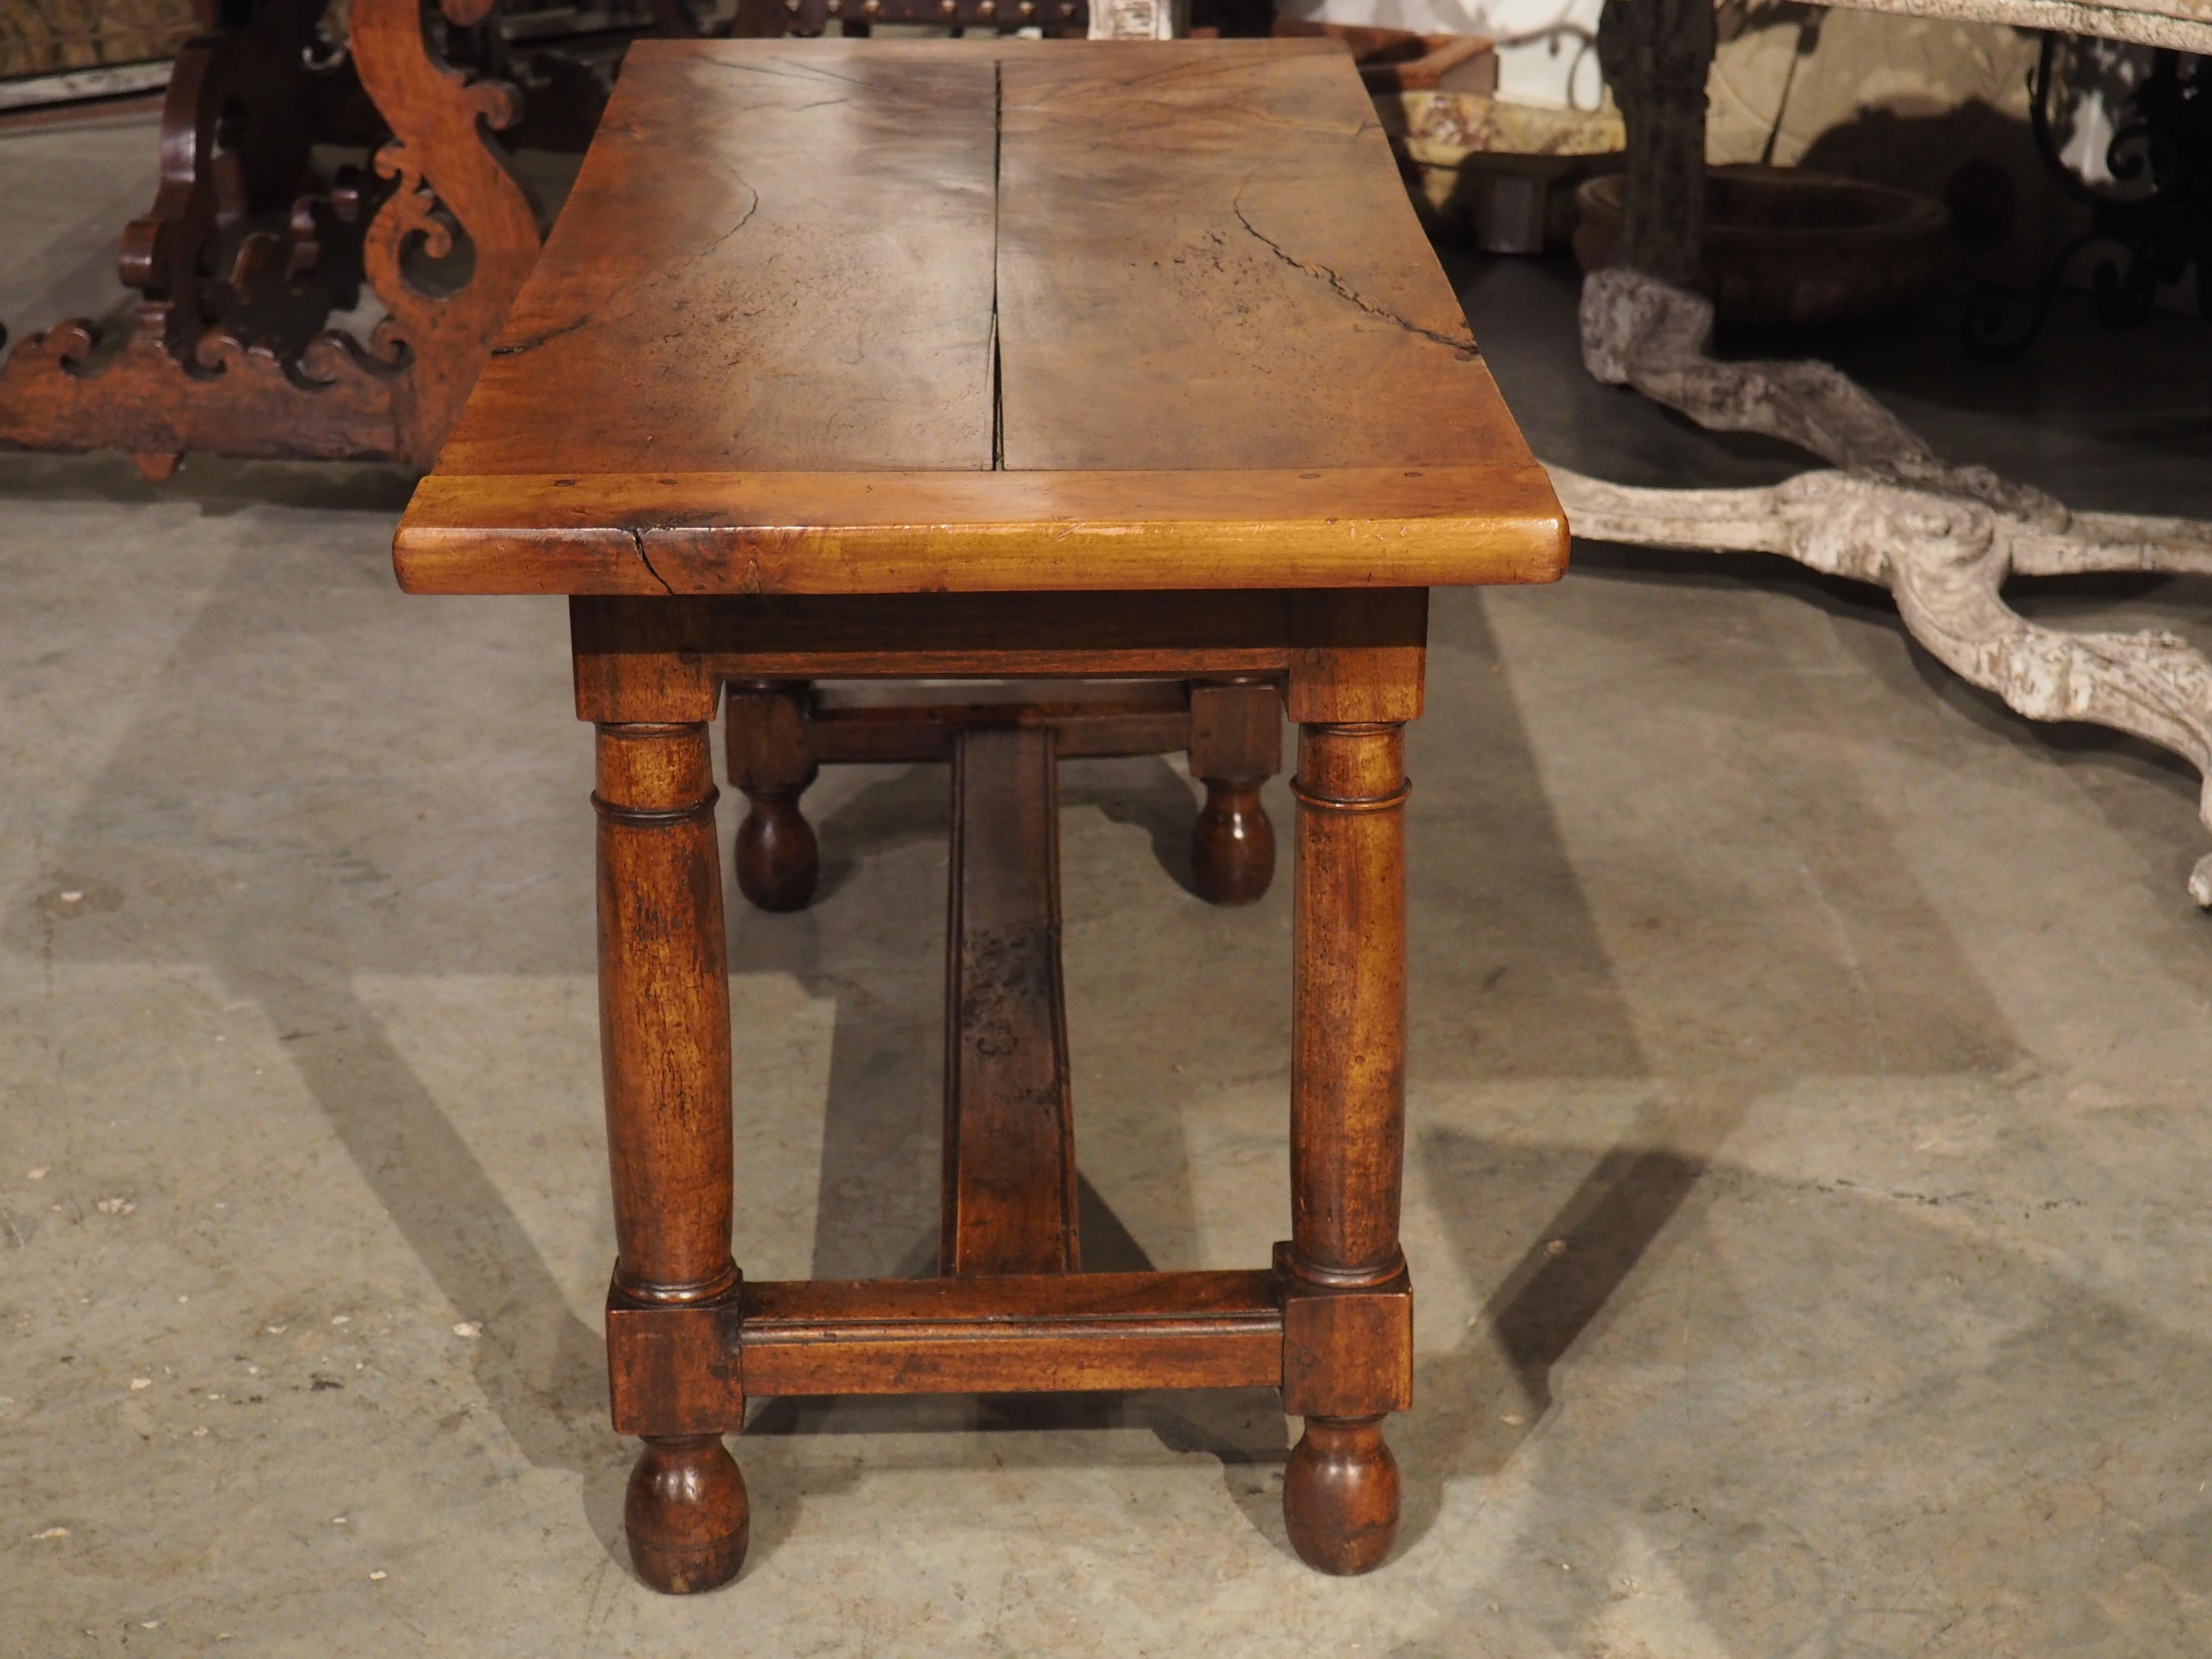 19th Century Single Burl Walnut Plank Table from Normandy, France In Good Condition For Sale In Dallas, TX